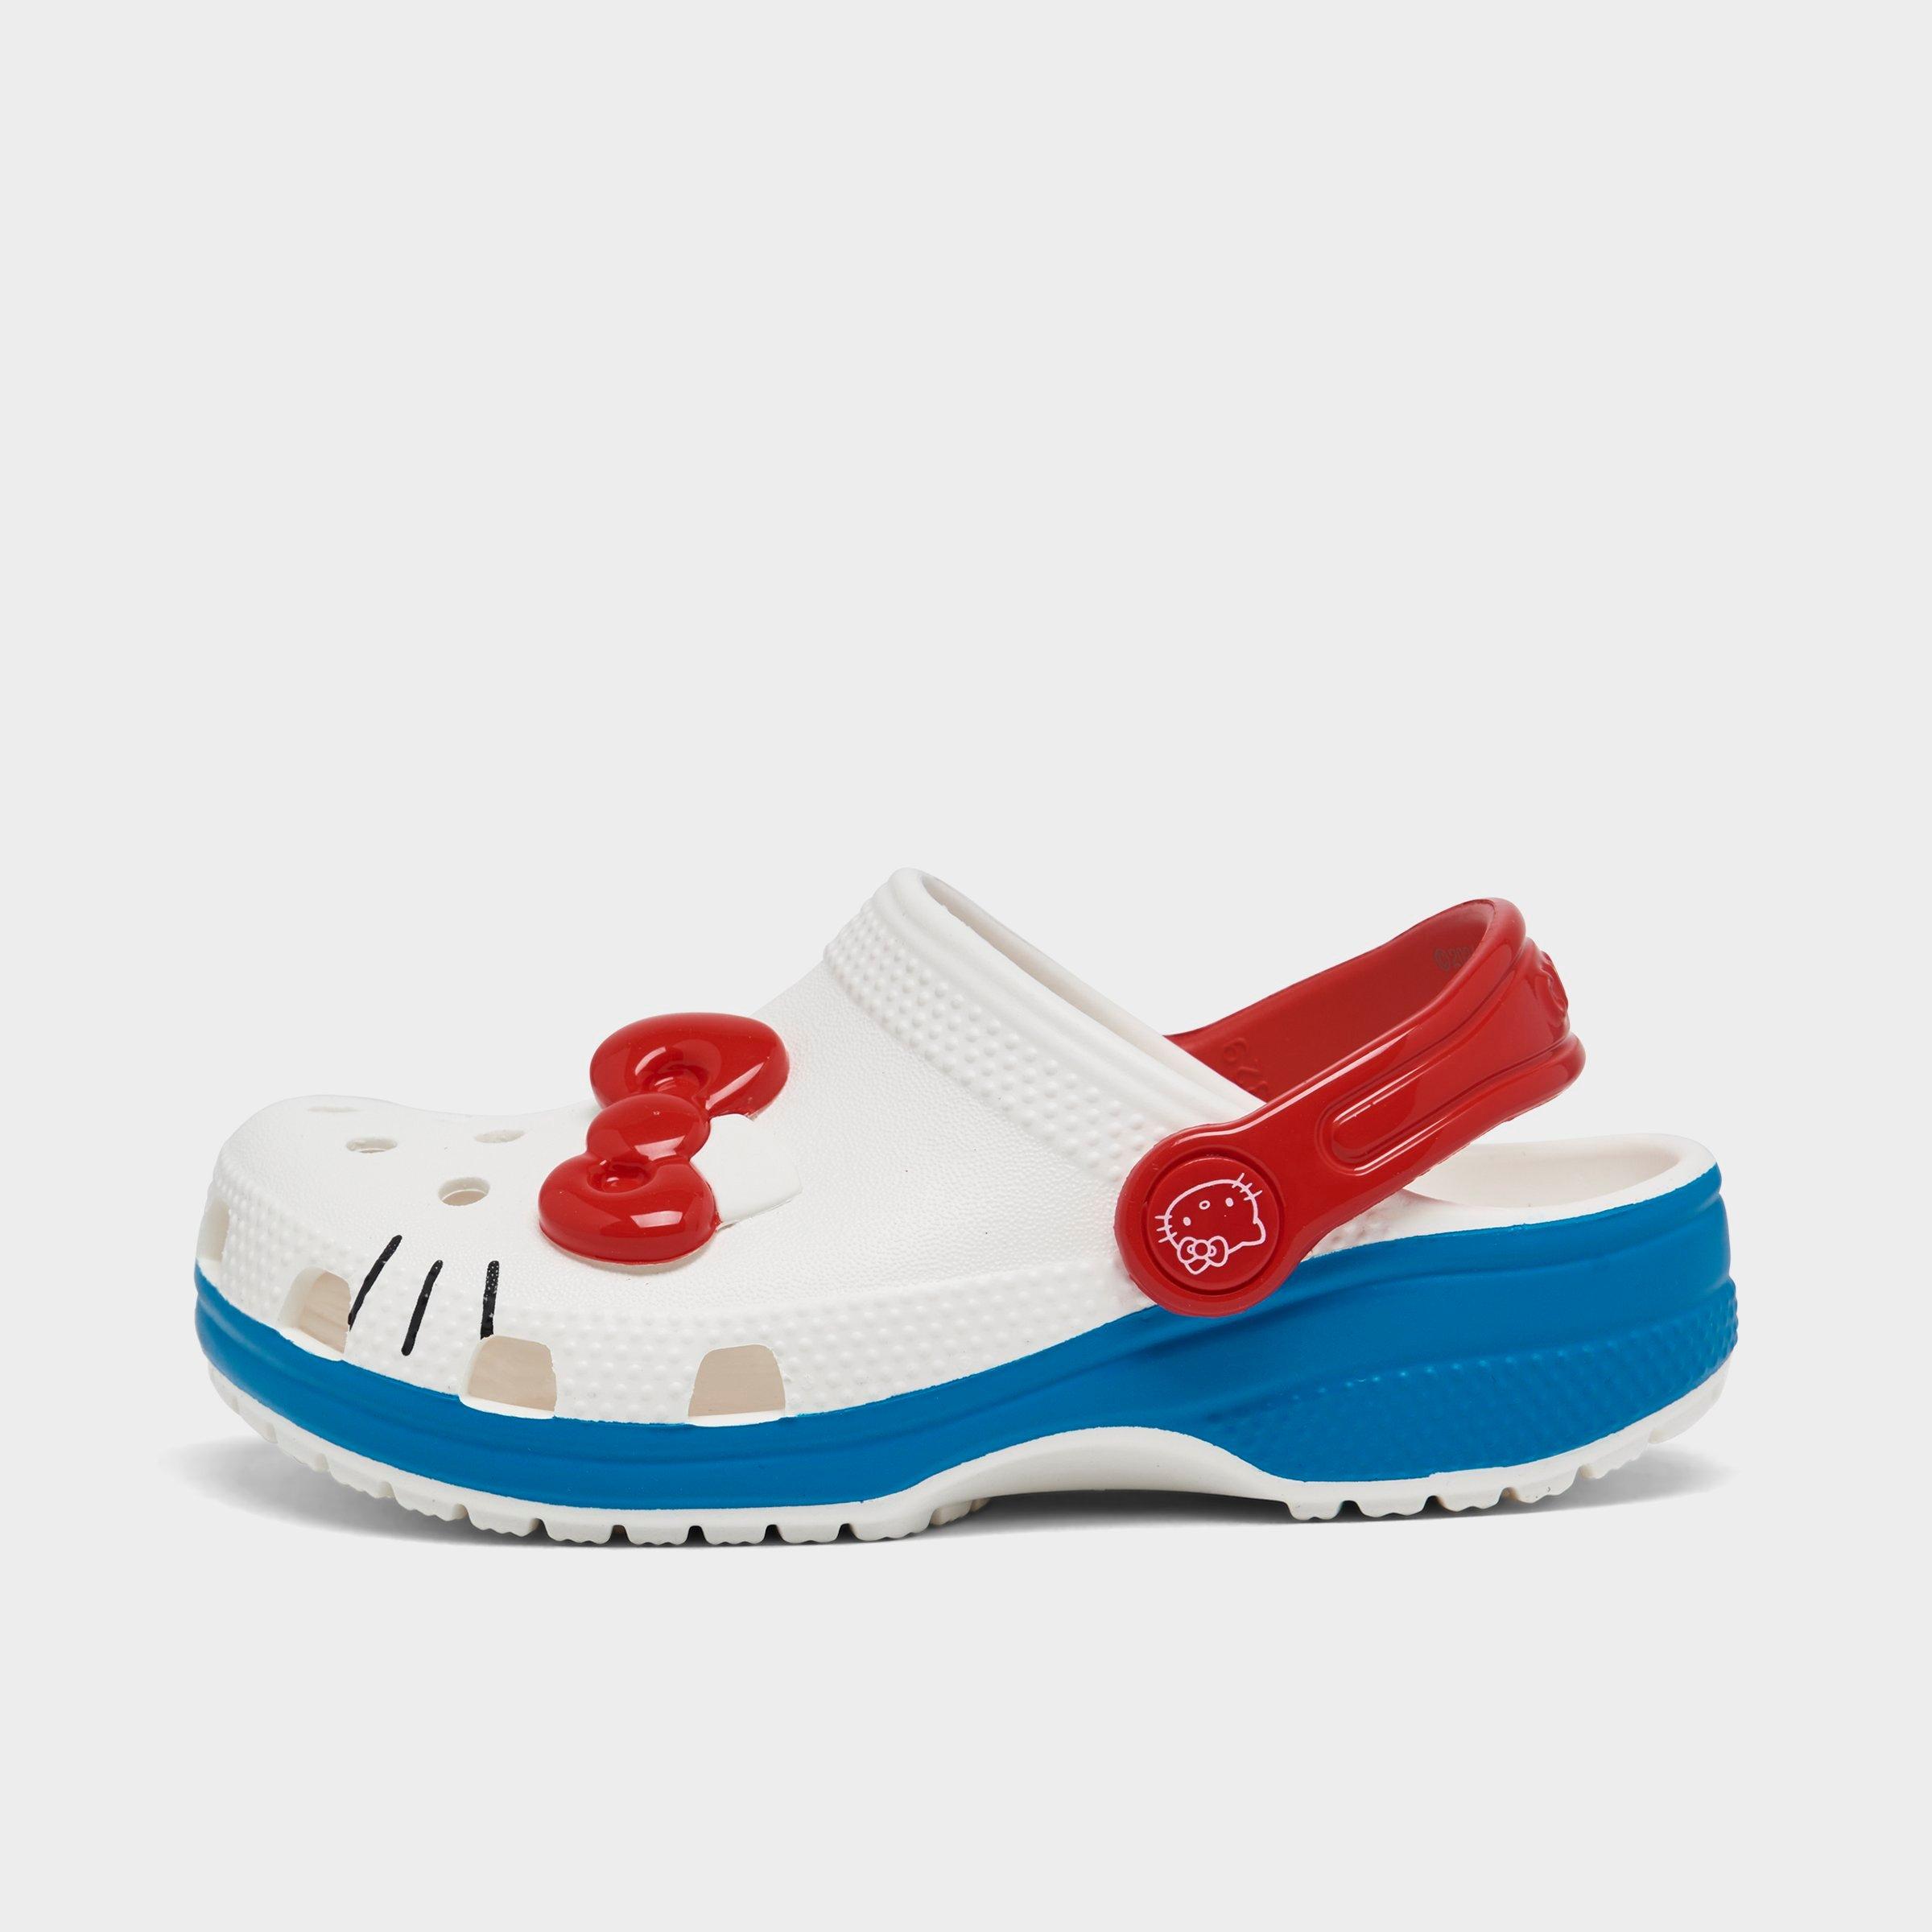 UPC 196265573776 product image for Crocs Girls' Toddler x Hello Kitty Classic Clog Shoes in White/White Size 4.0 | upcitemdb.com